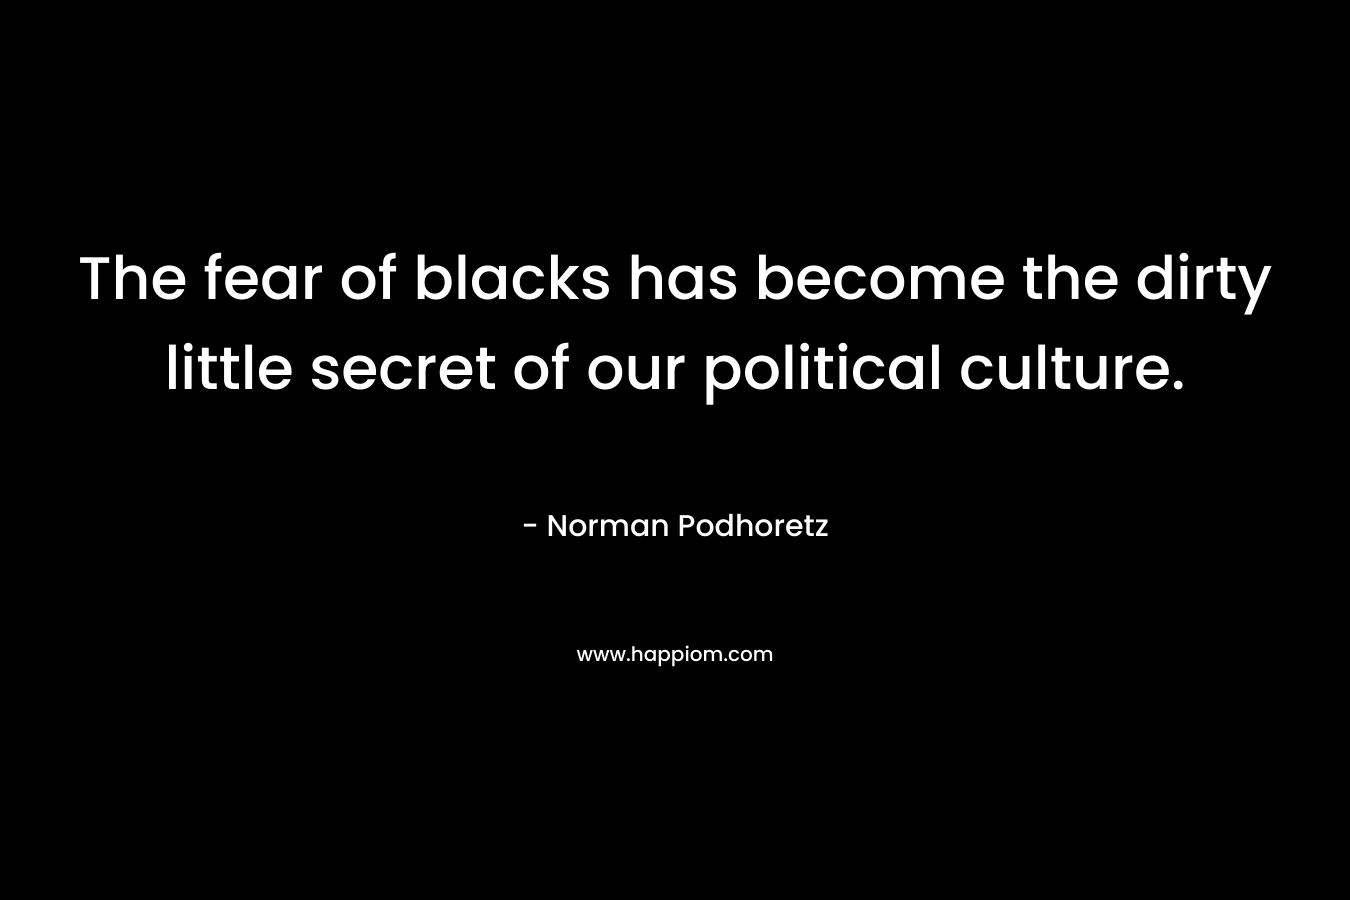 The fear of blacks has become the dirty little secret of our political culture.